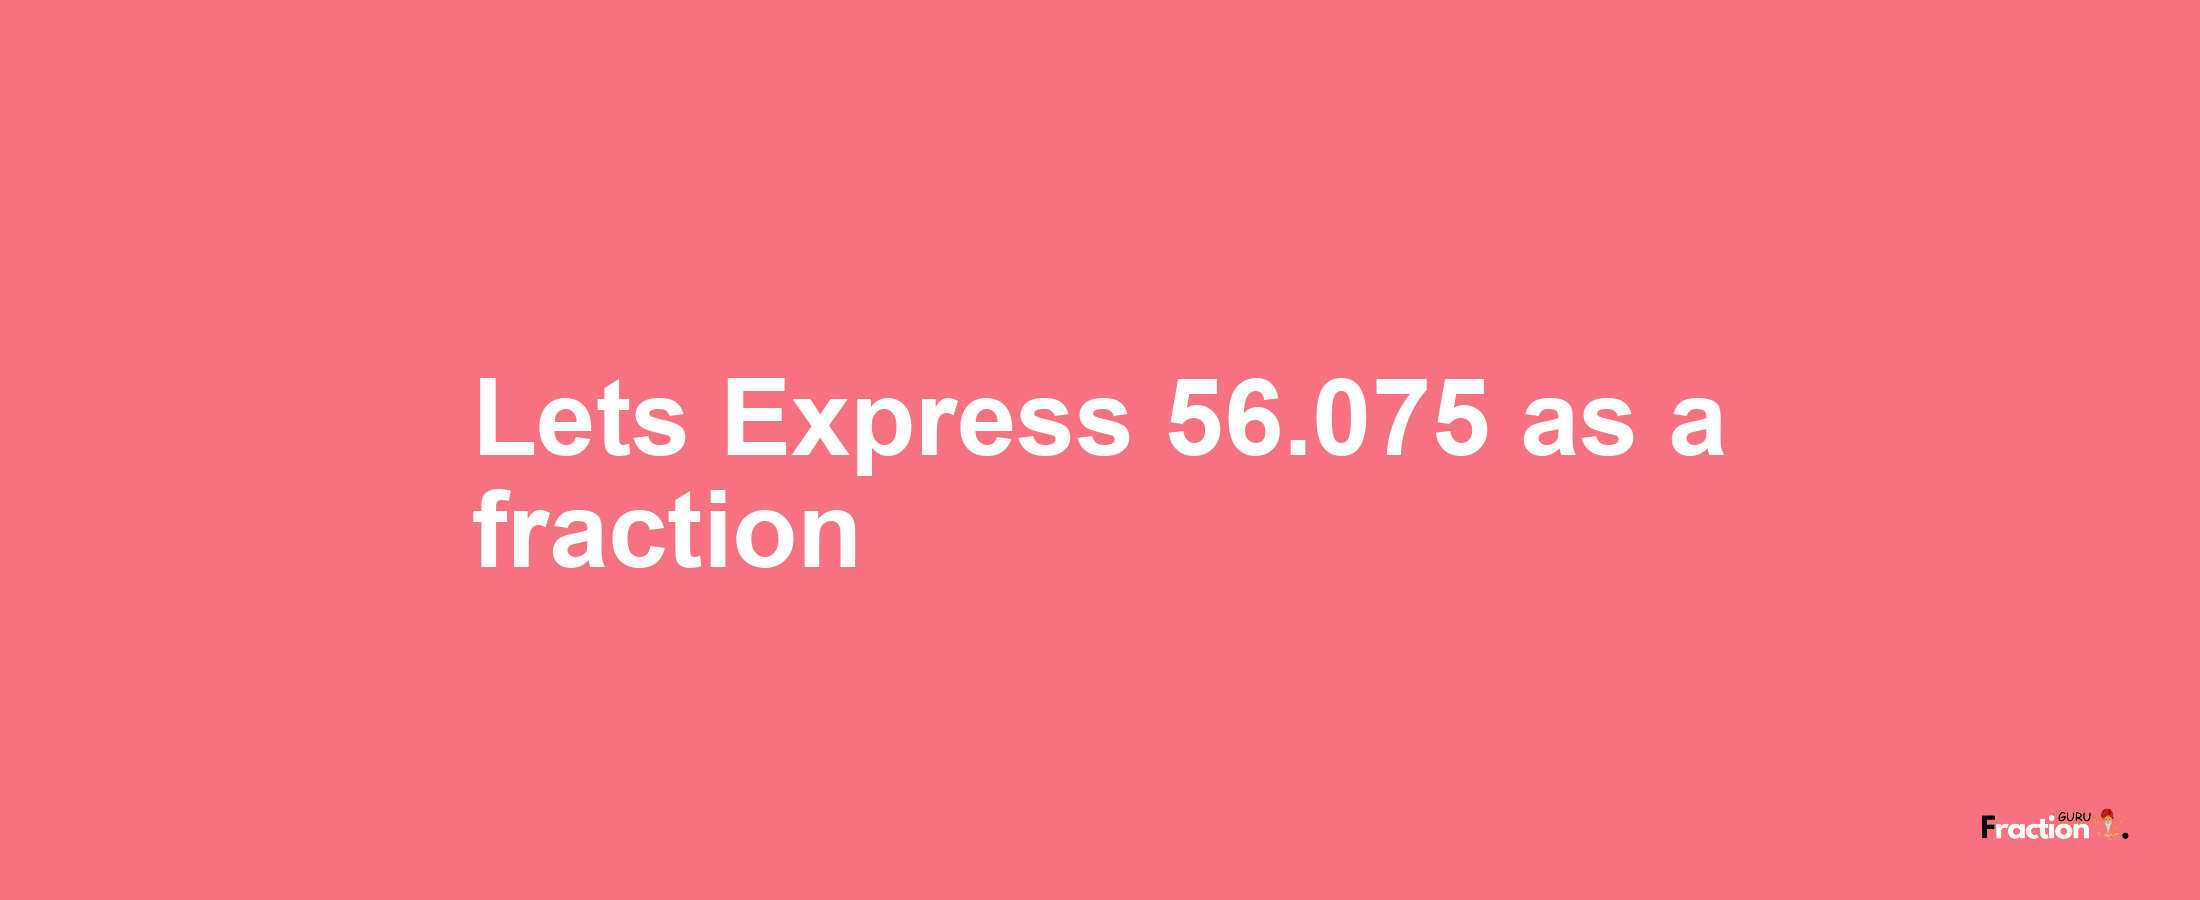 Lets Express 56.075 as afraction